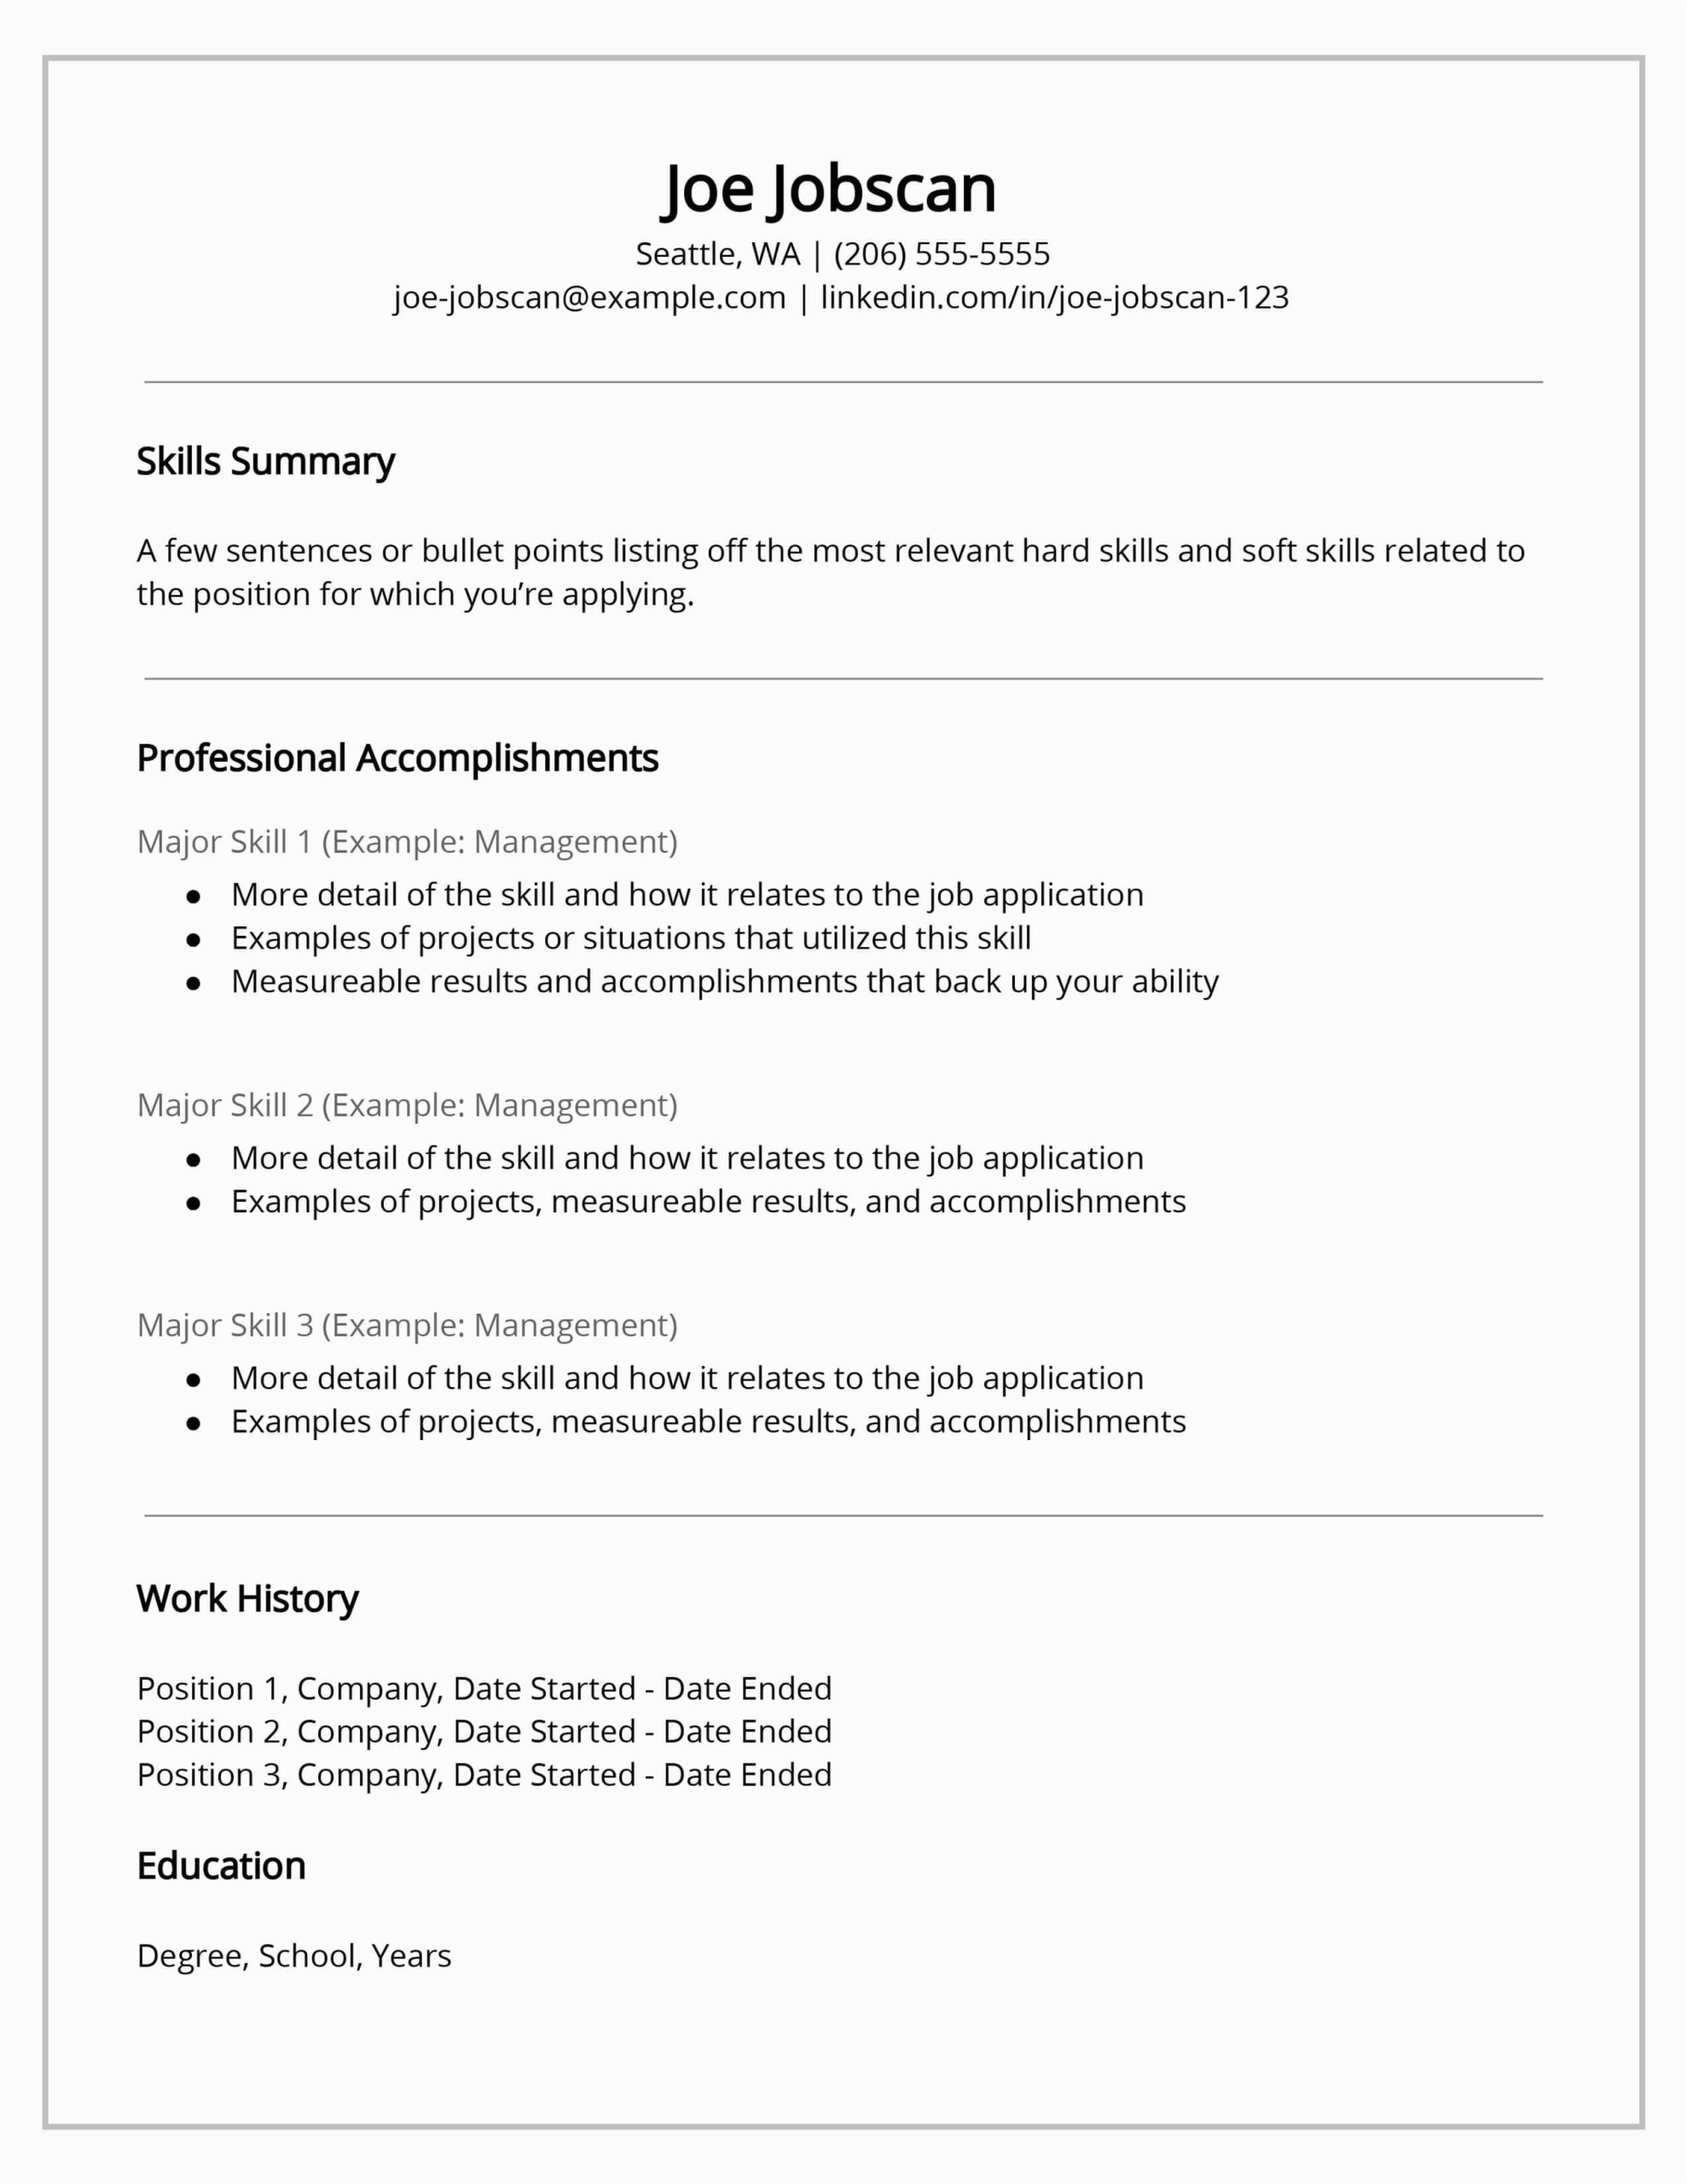 Samples Of A Functional Resume Template Functional Resume Template Functional Resume Examples Skills Based